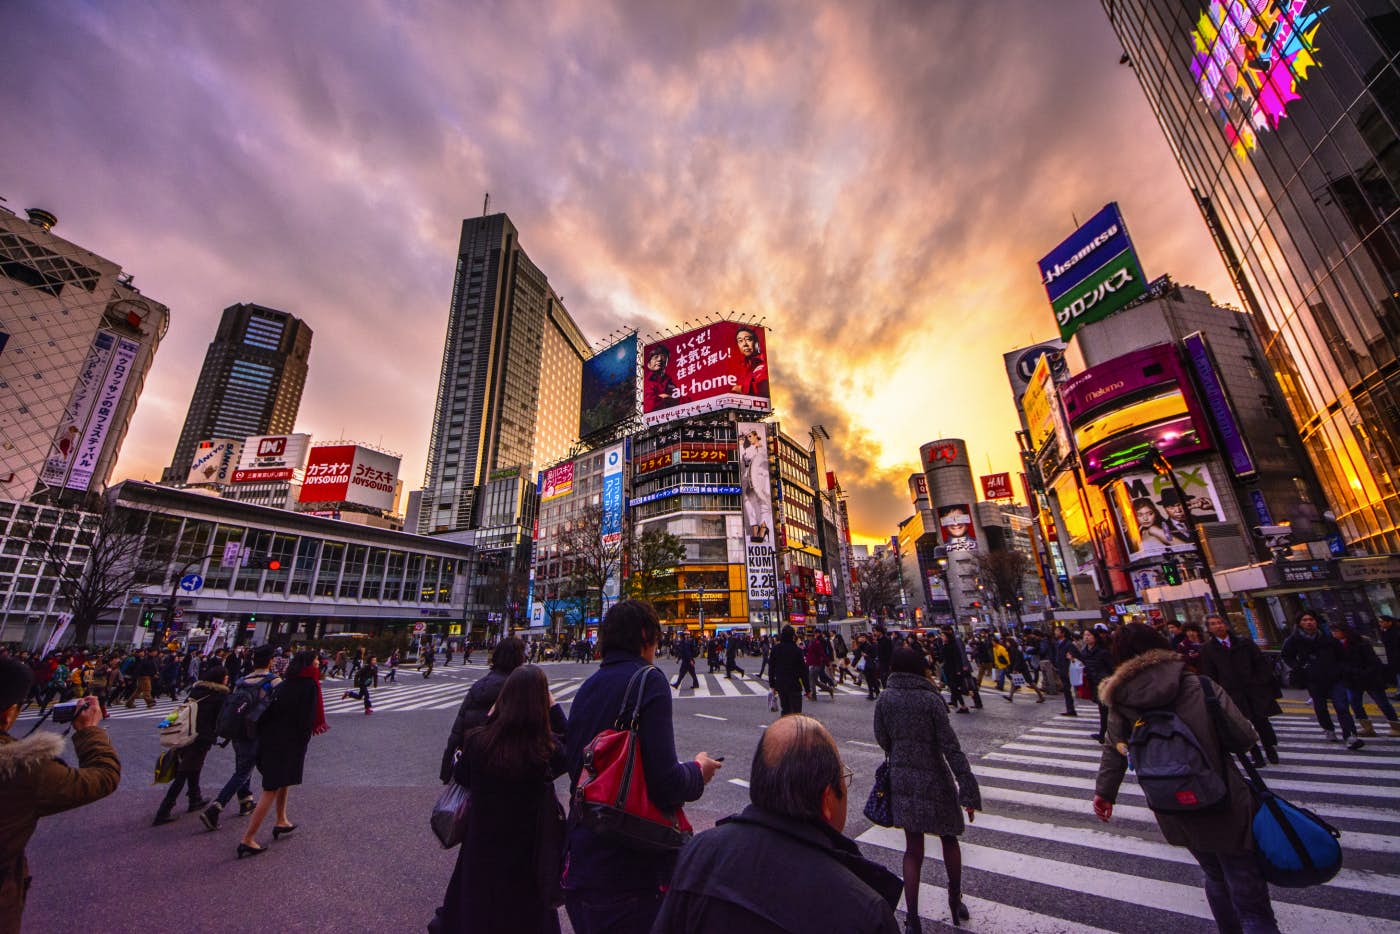 Shibuya Crossing | Tokyo, Japan Attractions - Lonely Planet